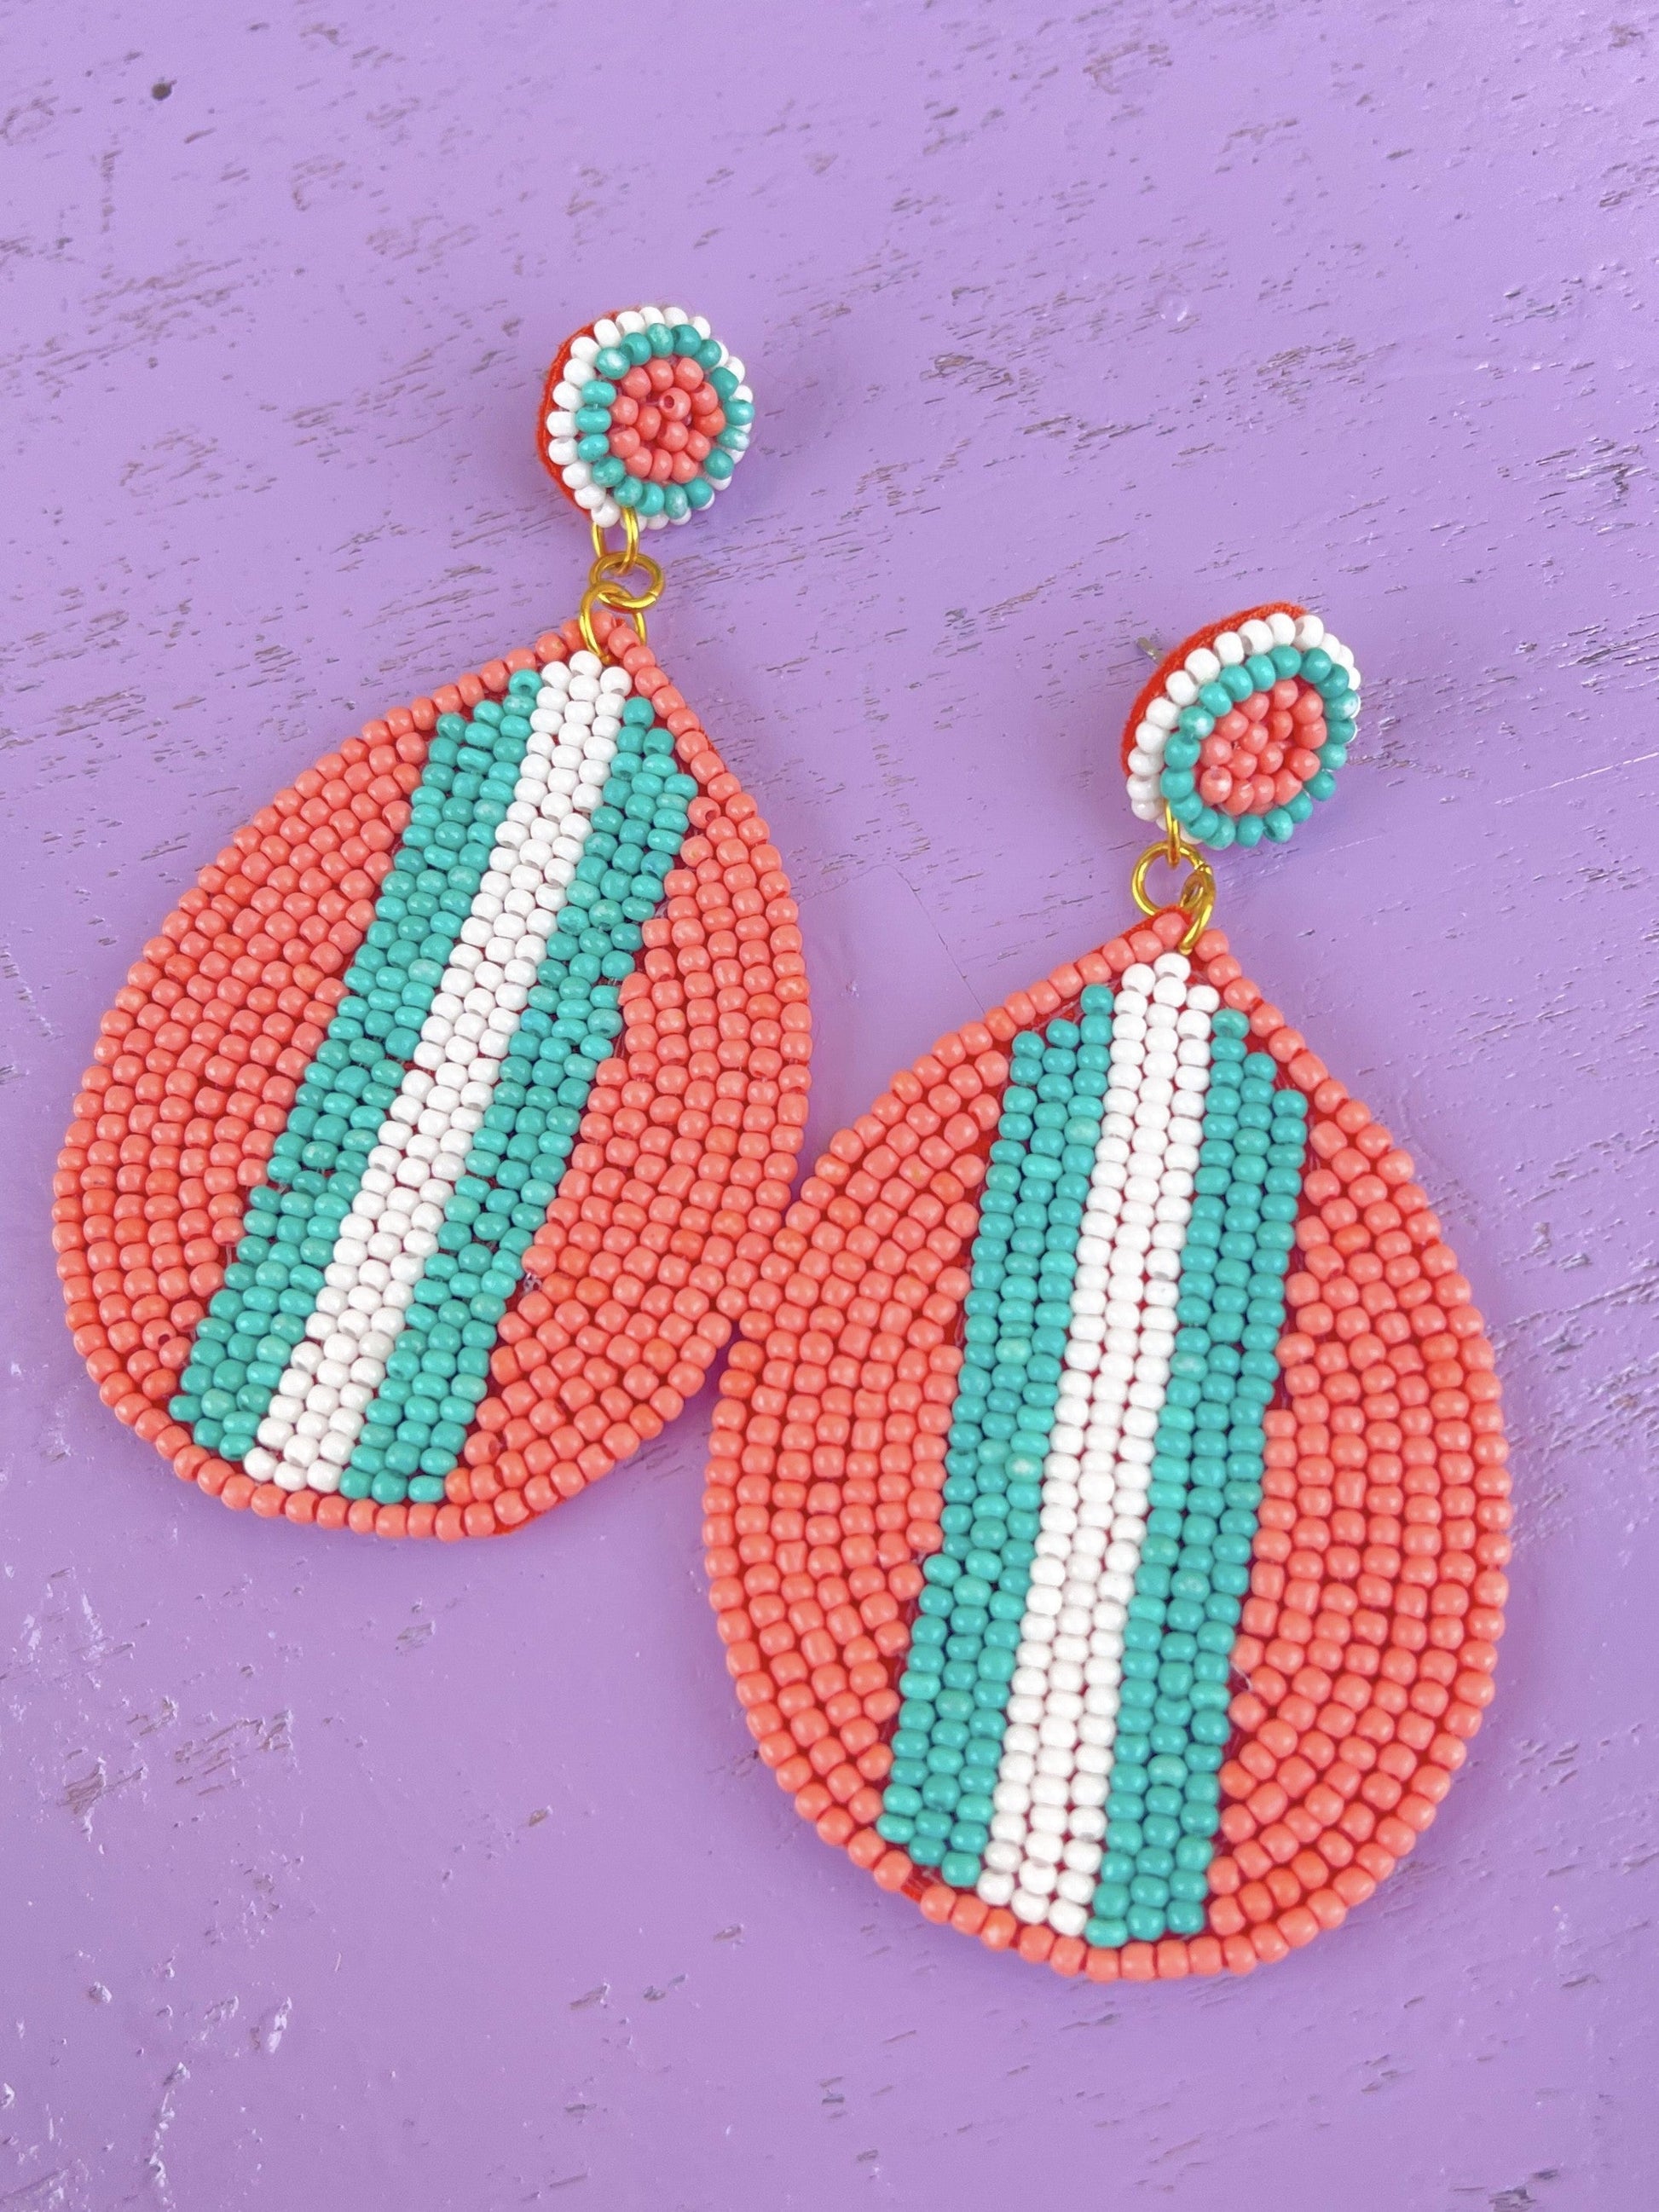 Stuck in the Middle Earrings-Seed Beed Earring-Golden Stella-The Village Shoppe, Women’s Fashion Boutique, Shop Online and In Store - Located in Muscle Shoals, AL.